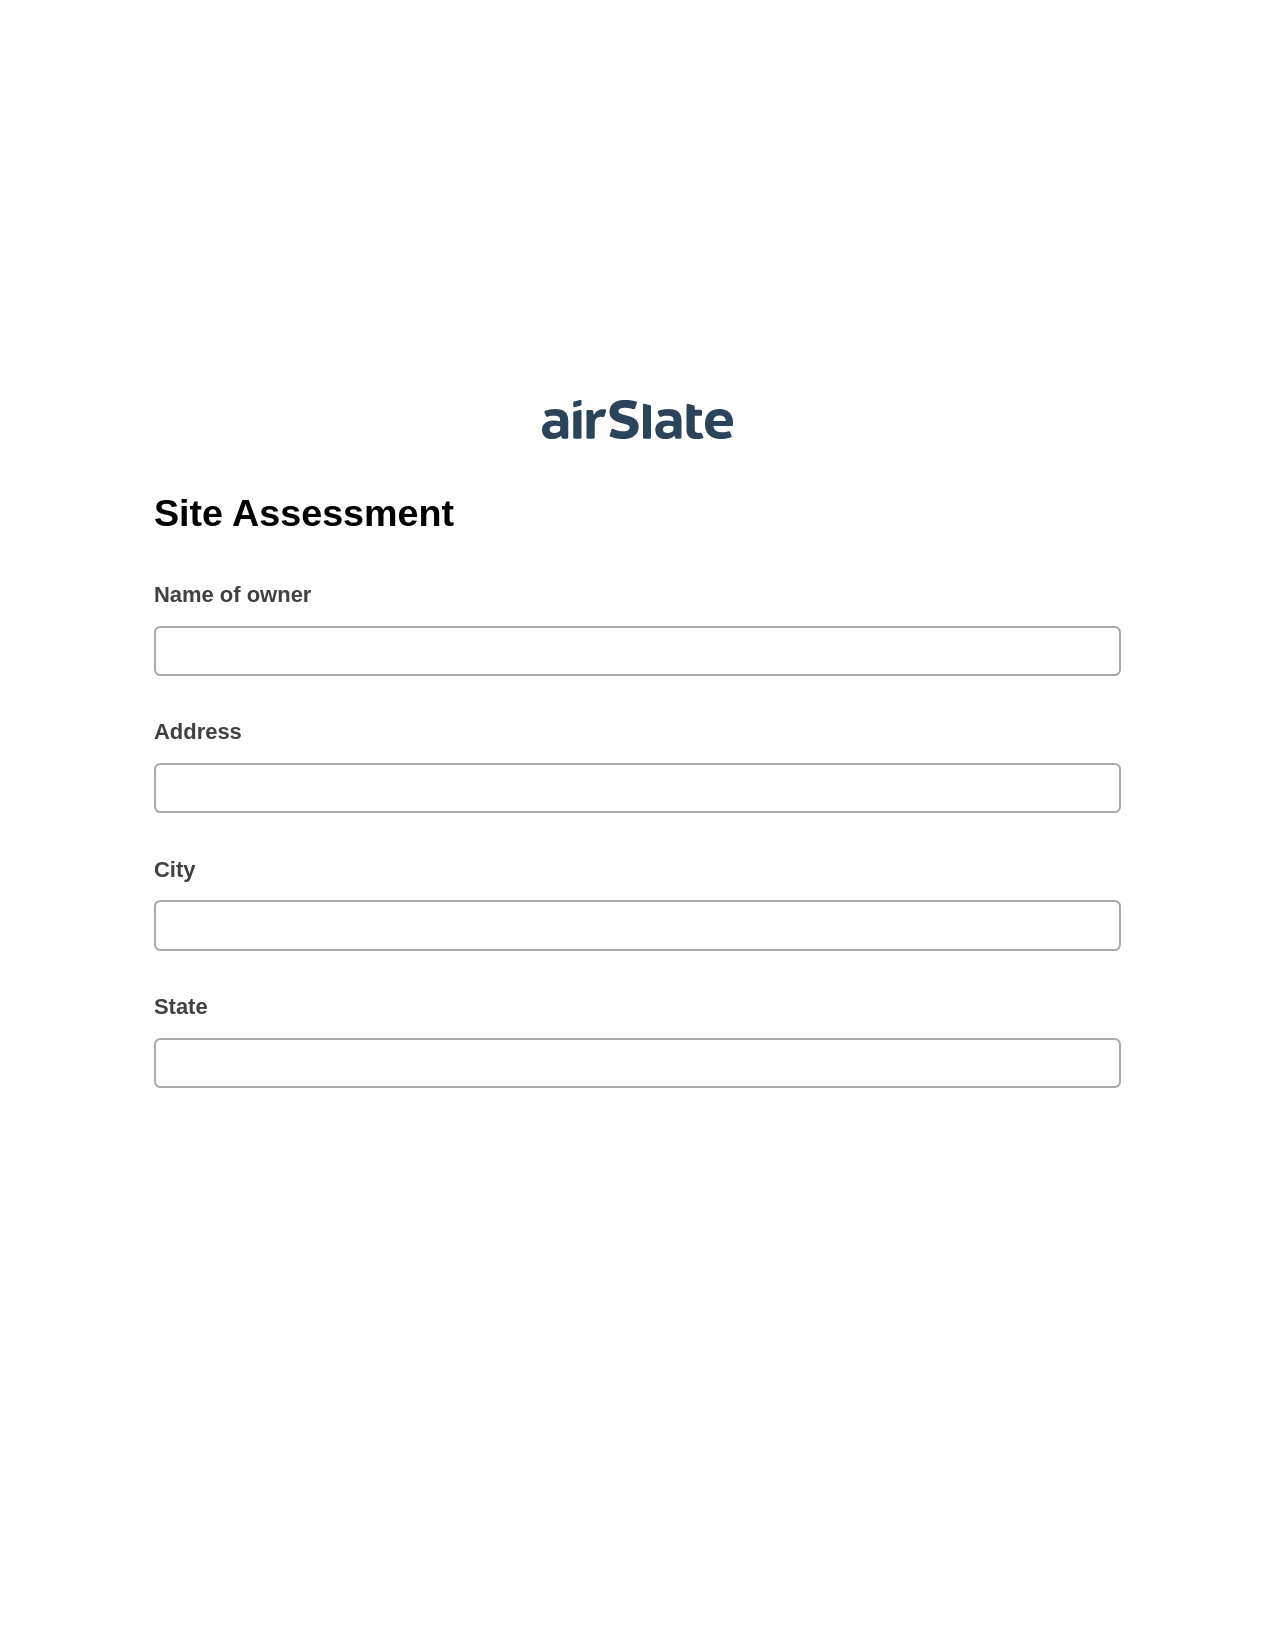 Site Assessment Pre-fill Slate from MS Dynamics 365 Records Bot, Create slate addon, Slack Two-Way Binding Bot